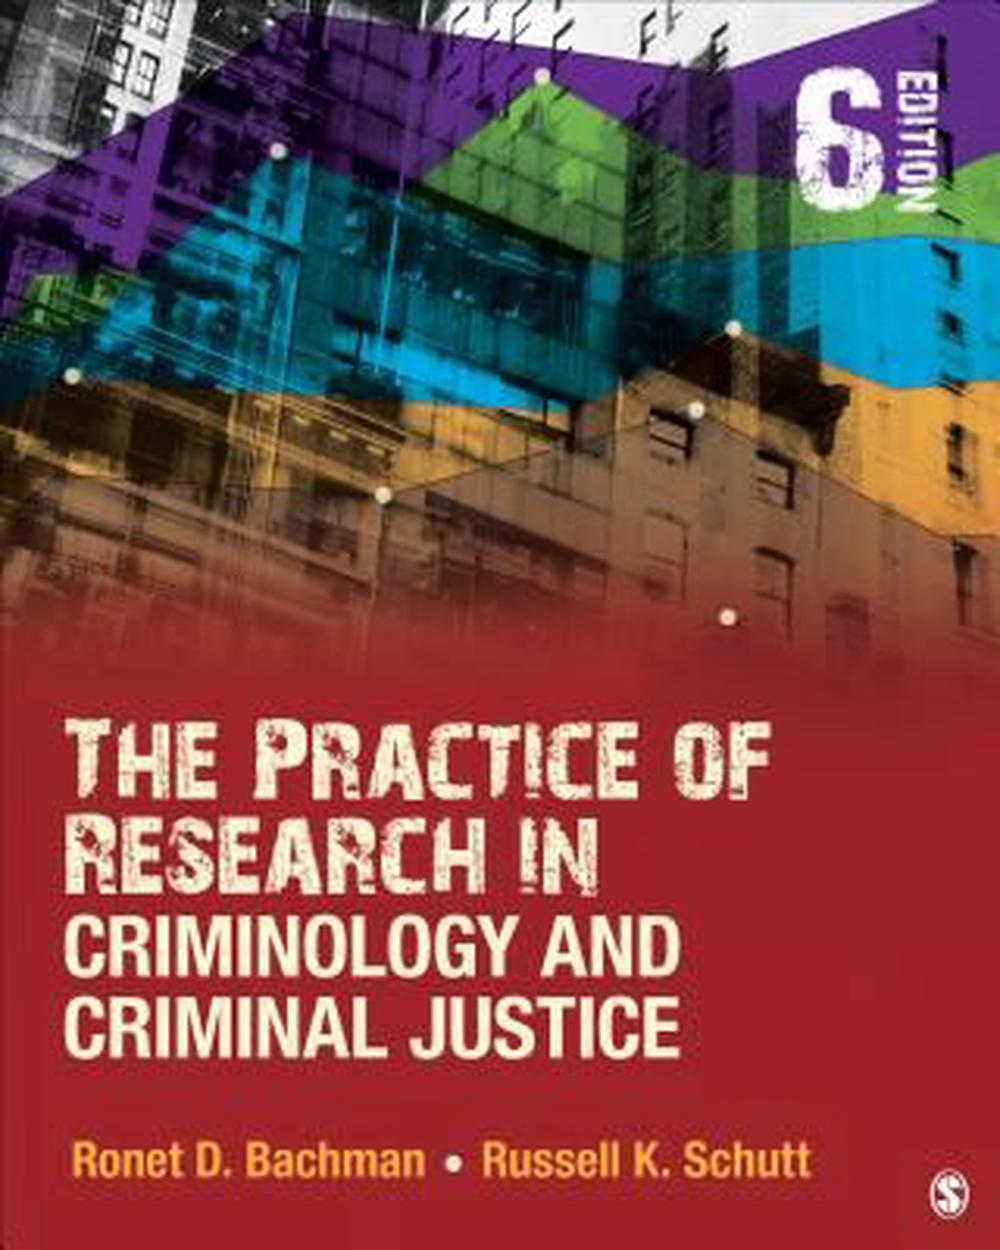 research title for criminology students